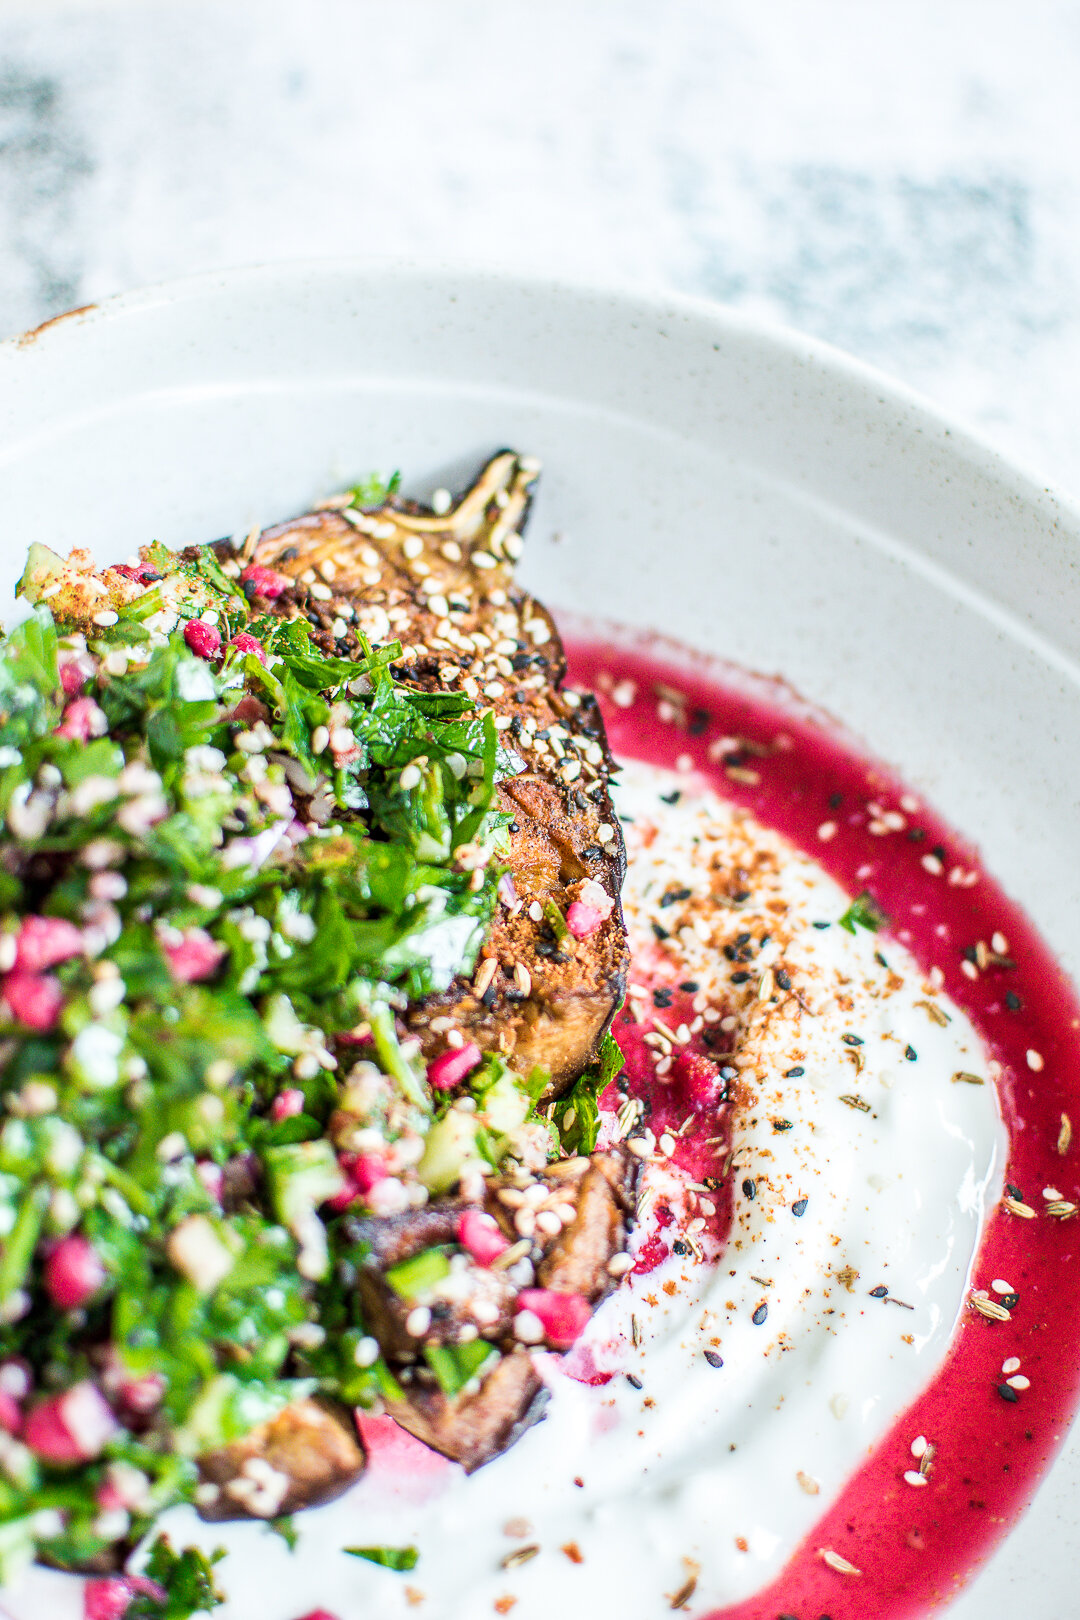 SPICE ROASTED EGGPLANT WITH POMEGRANATE TABOULEH